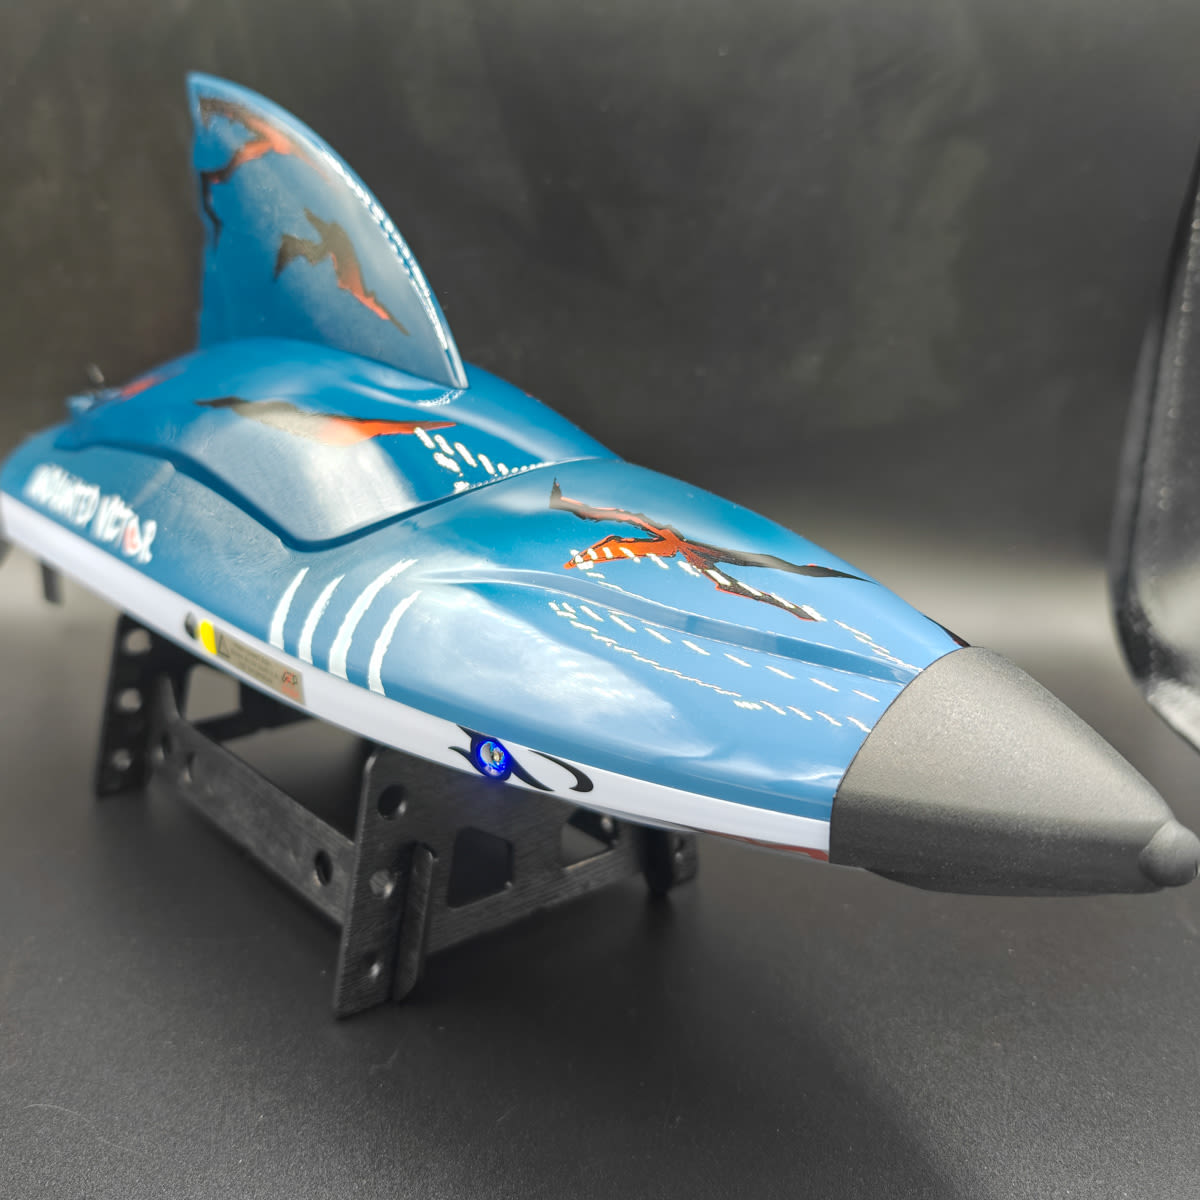 DEERC Fast Brushless RC Shark Boat review - bringing the RC party to the sea (or at least a pond) near you - The Gadgeteer